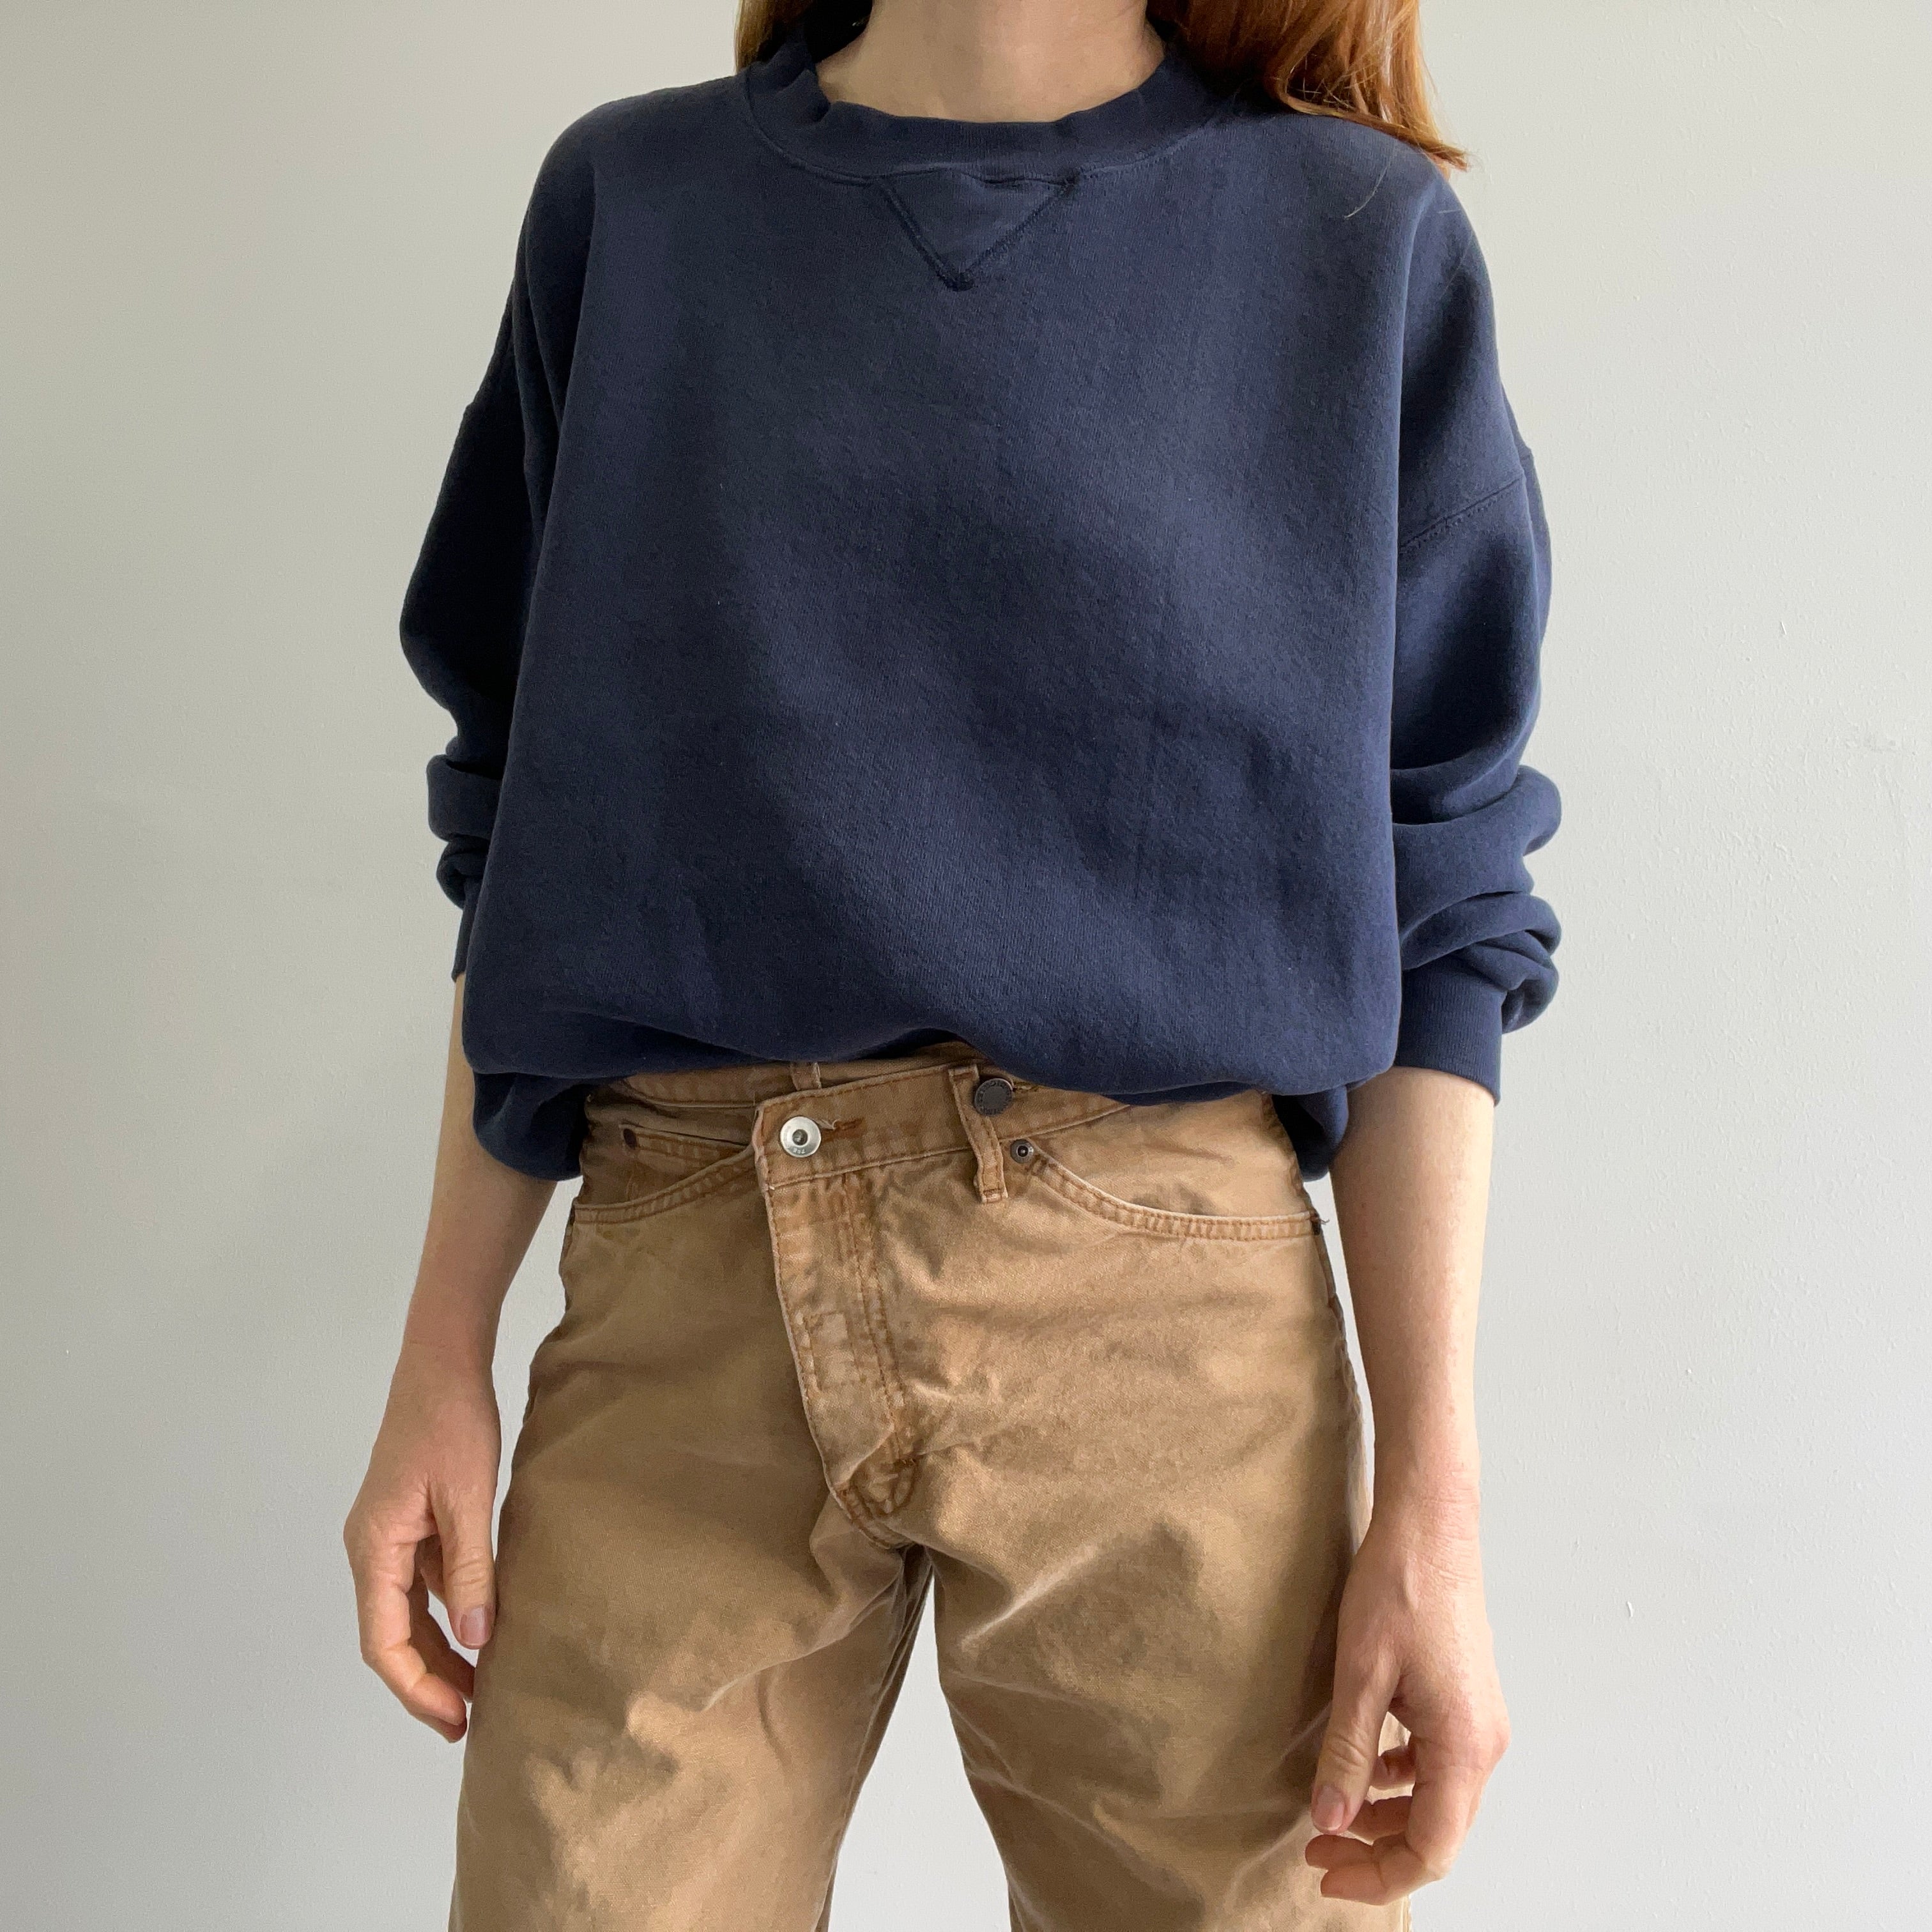 1990s Faded Blank Navy Single Gusset Oversized Sweatshirt by Discus